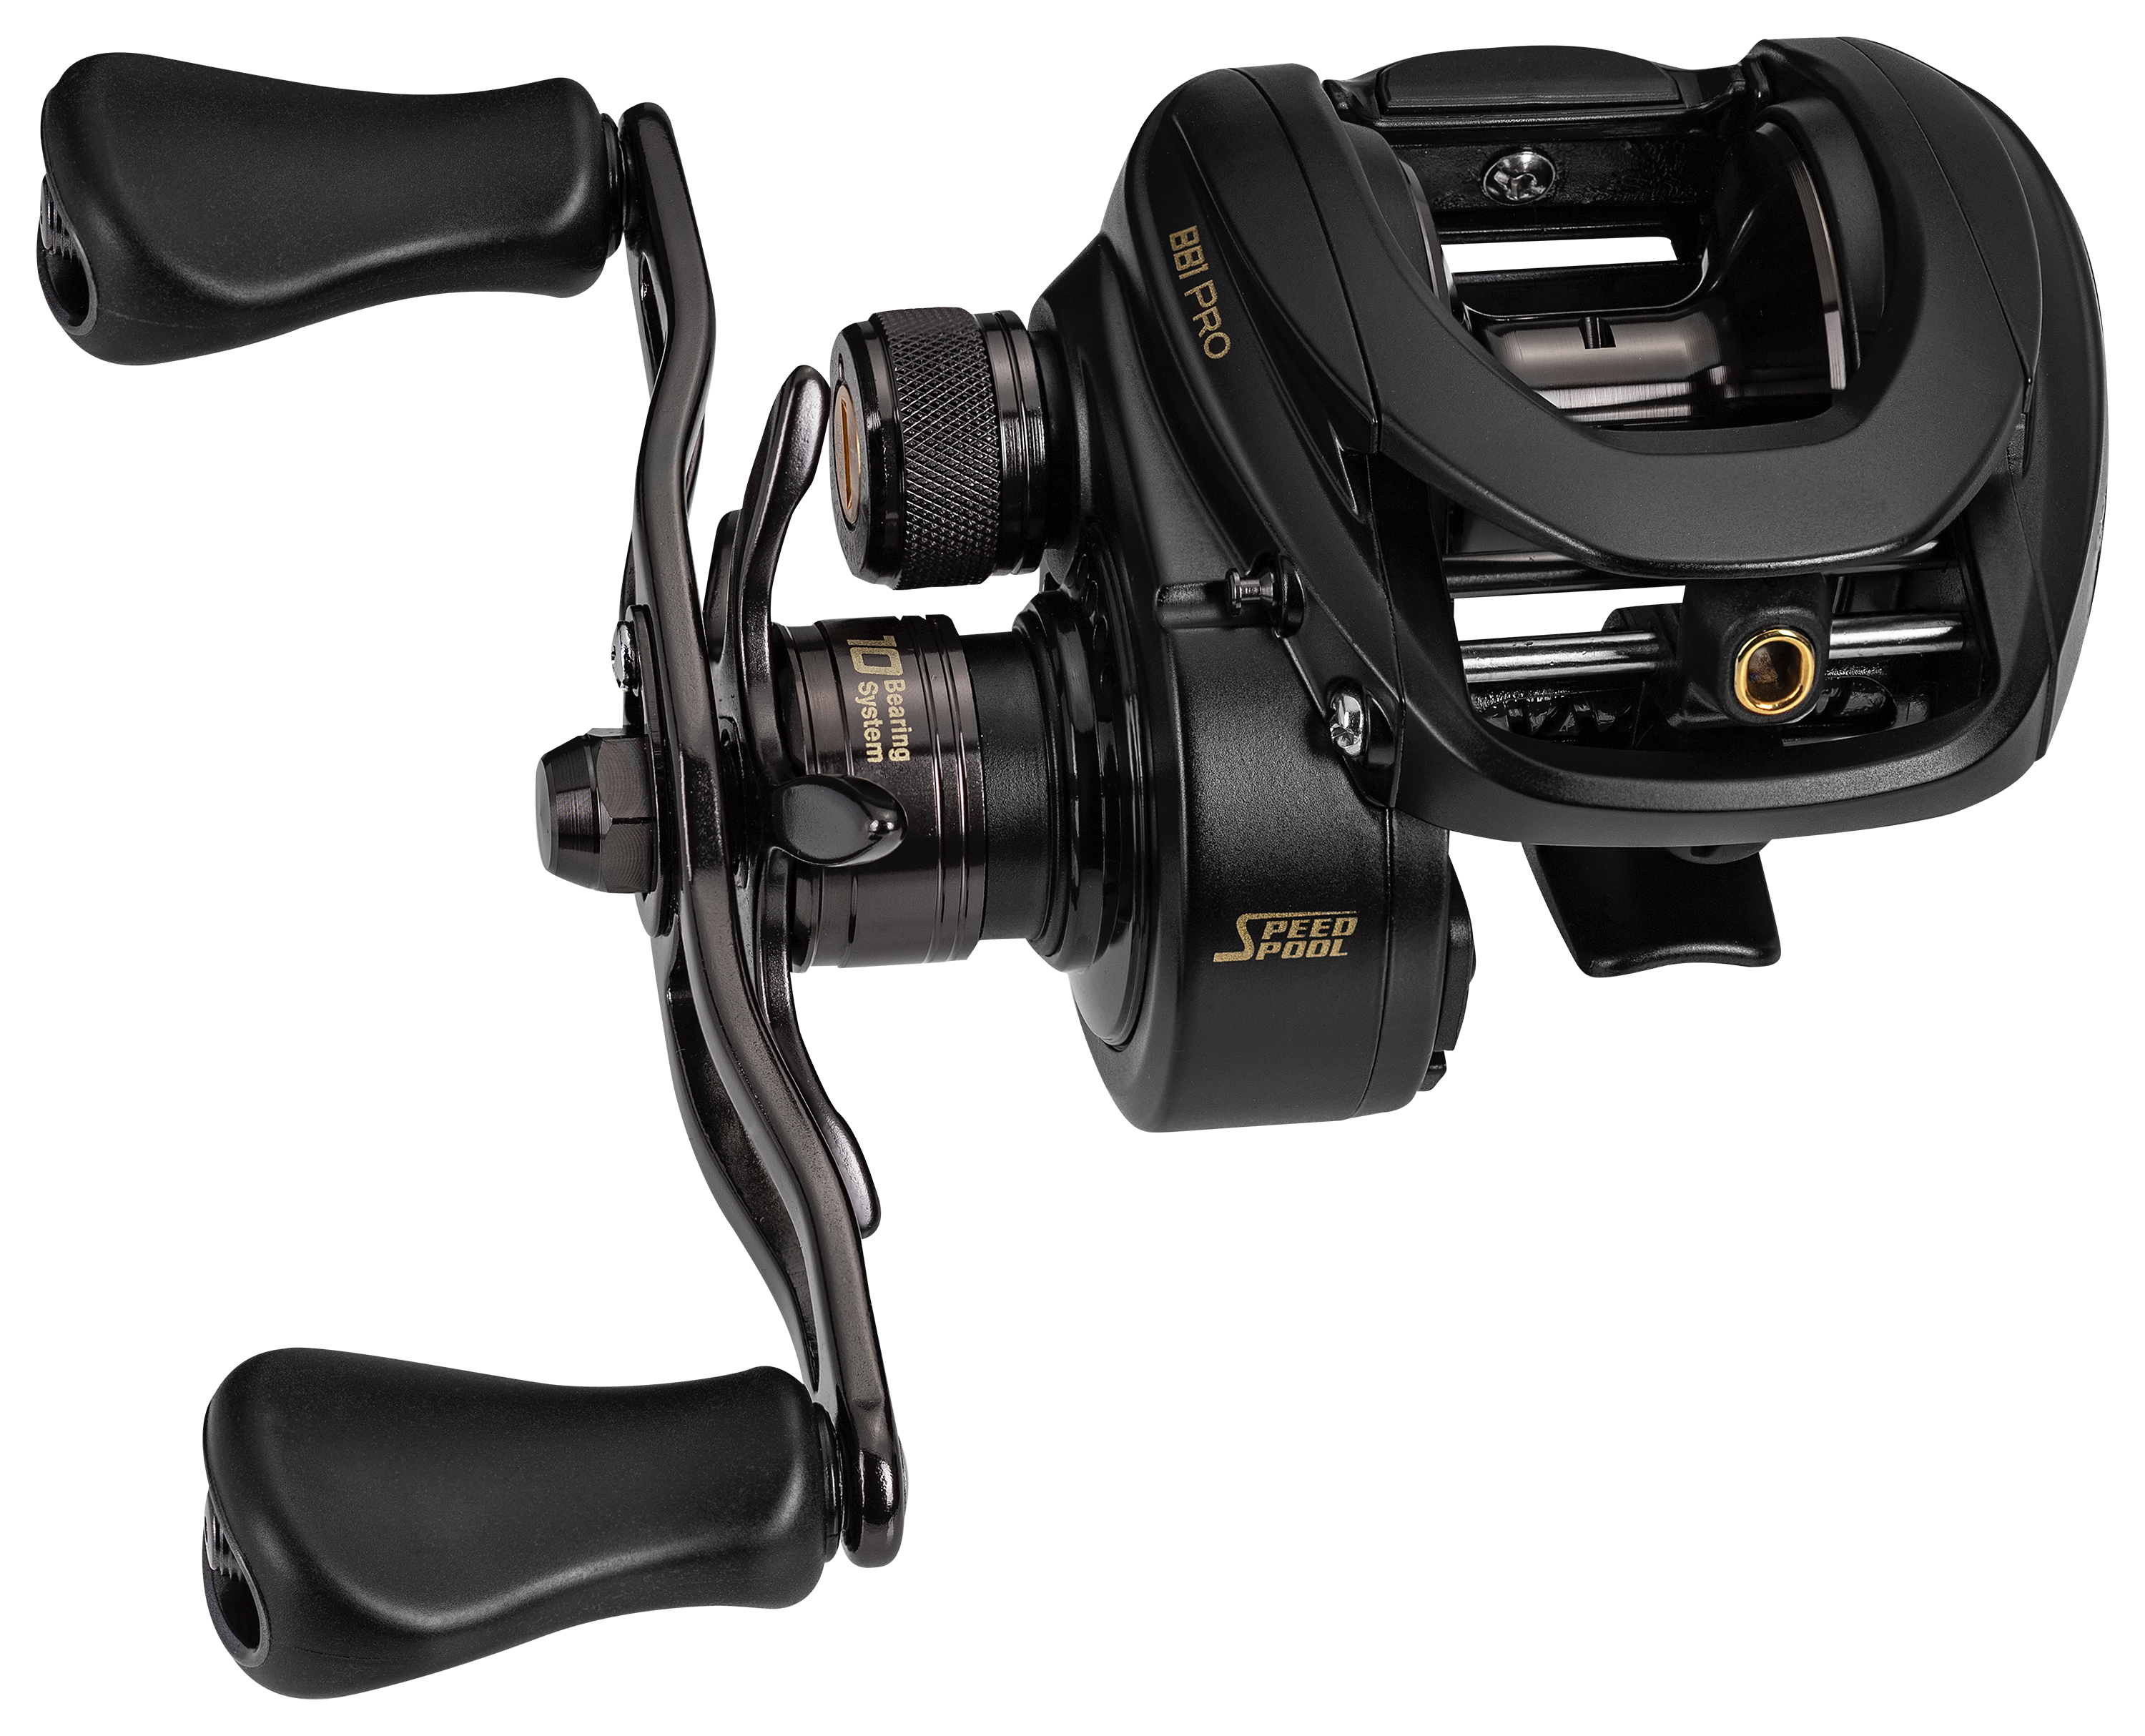 The Lew's BB1 Pro Baitcast Reel is Built for Hours on the Water   Dependable. Exceptional. The newly revamped BB1 Pro Baitcast Reel is built  for long hours on the water under